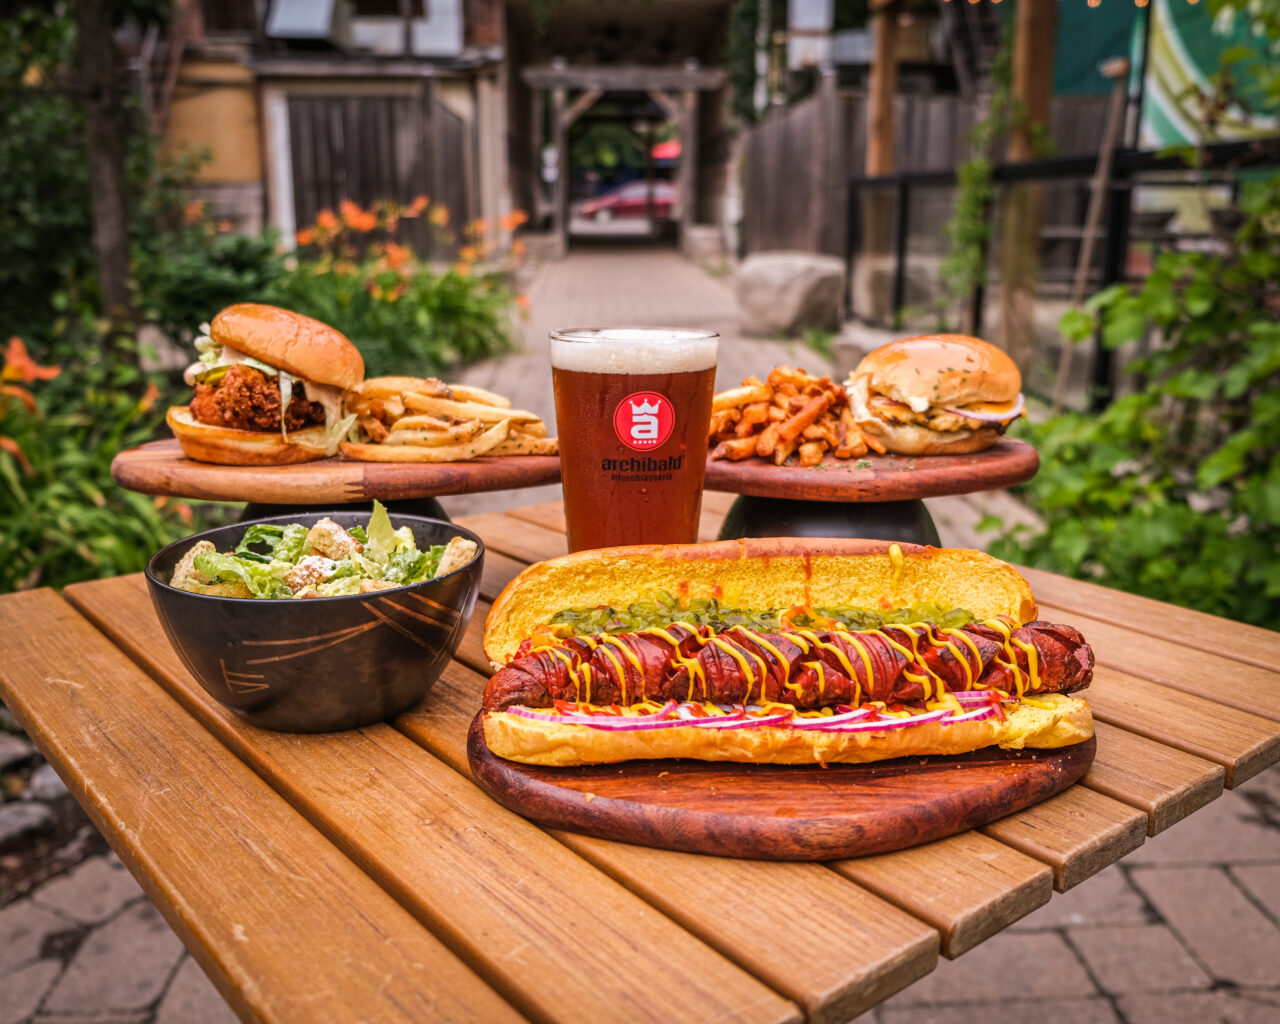 Food and a beer sitting on a wood table on the Dirty Burger patio surrounded by greenery.